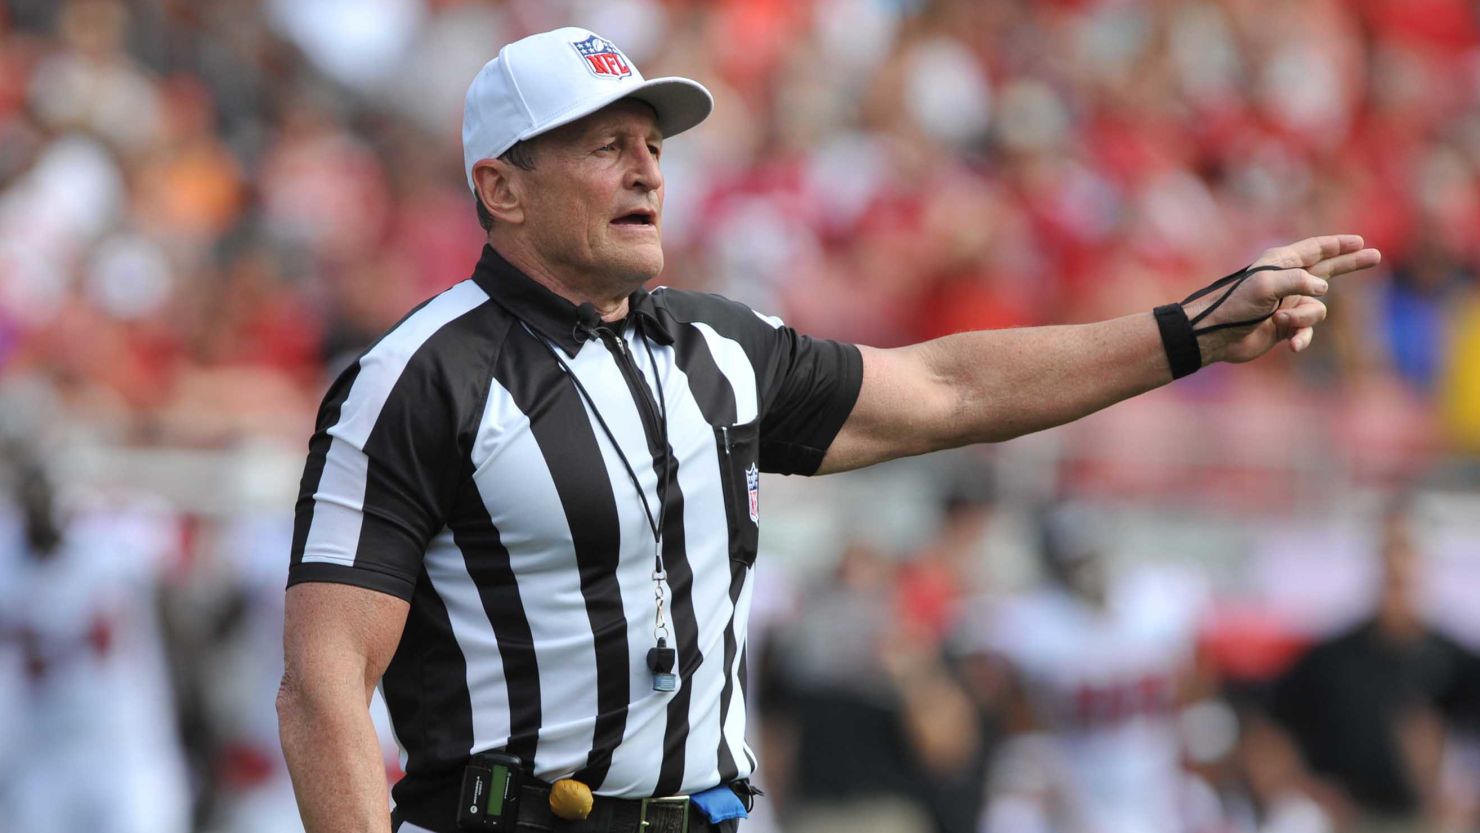 Ed Hochuli is known for his muscular physique and explanation of penalties.